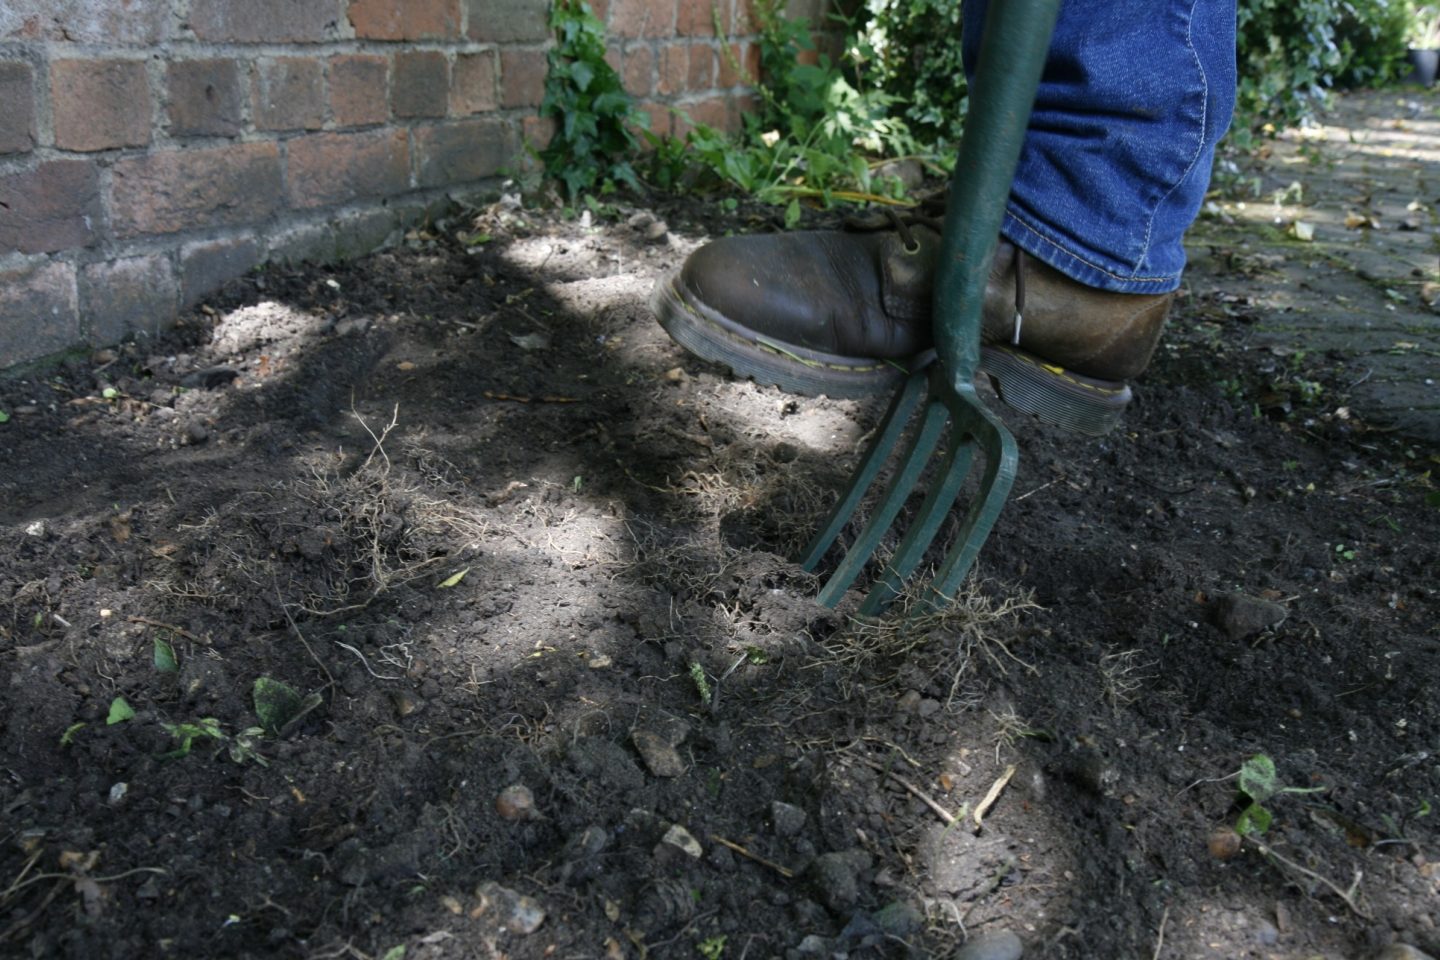 A large garden fork is used to dig the soil